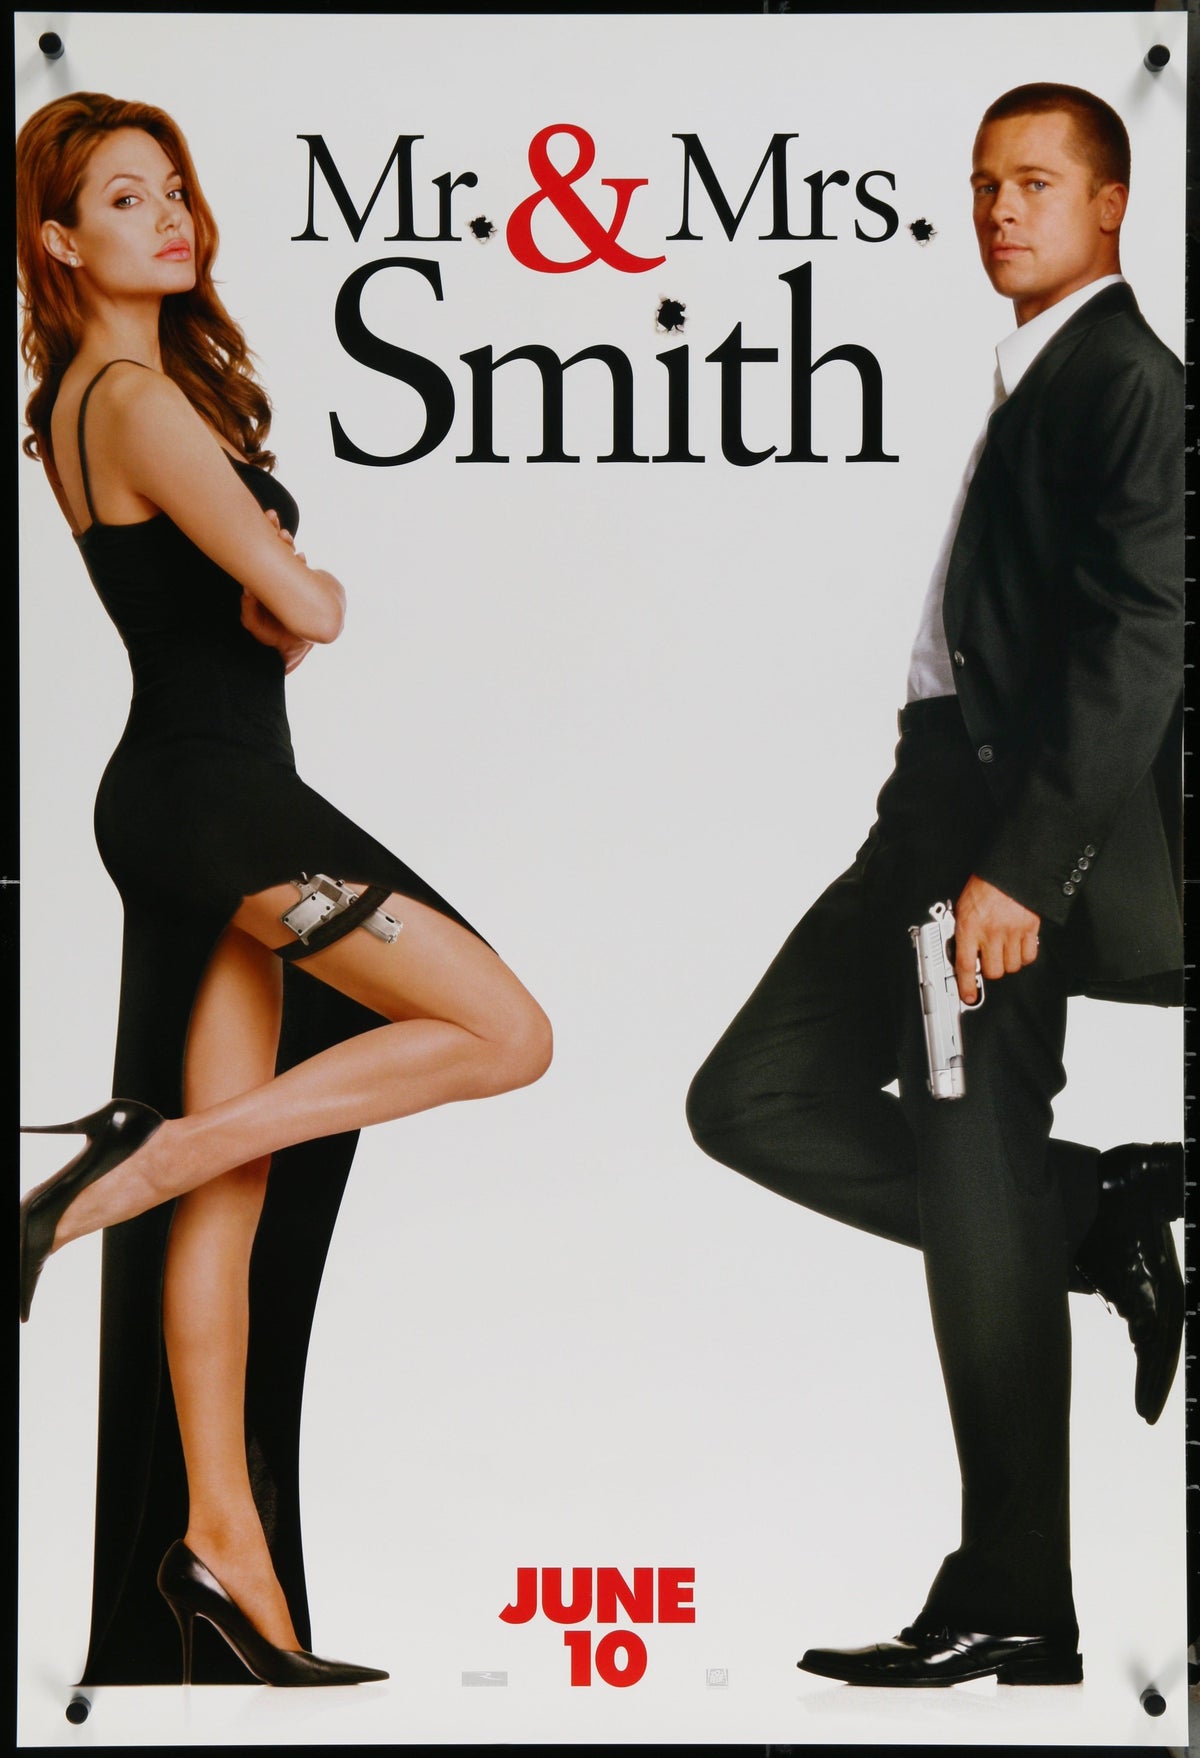 Mr. and Mrs. Smith 1 Sheet (27x41) Original Vintage Movie Poster